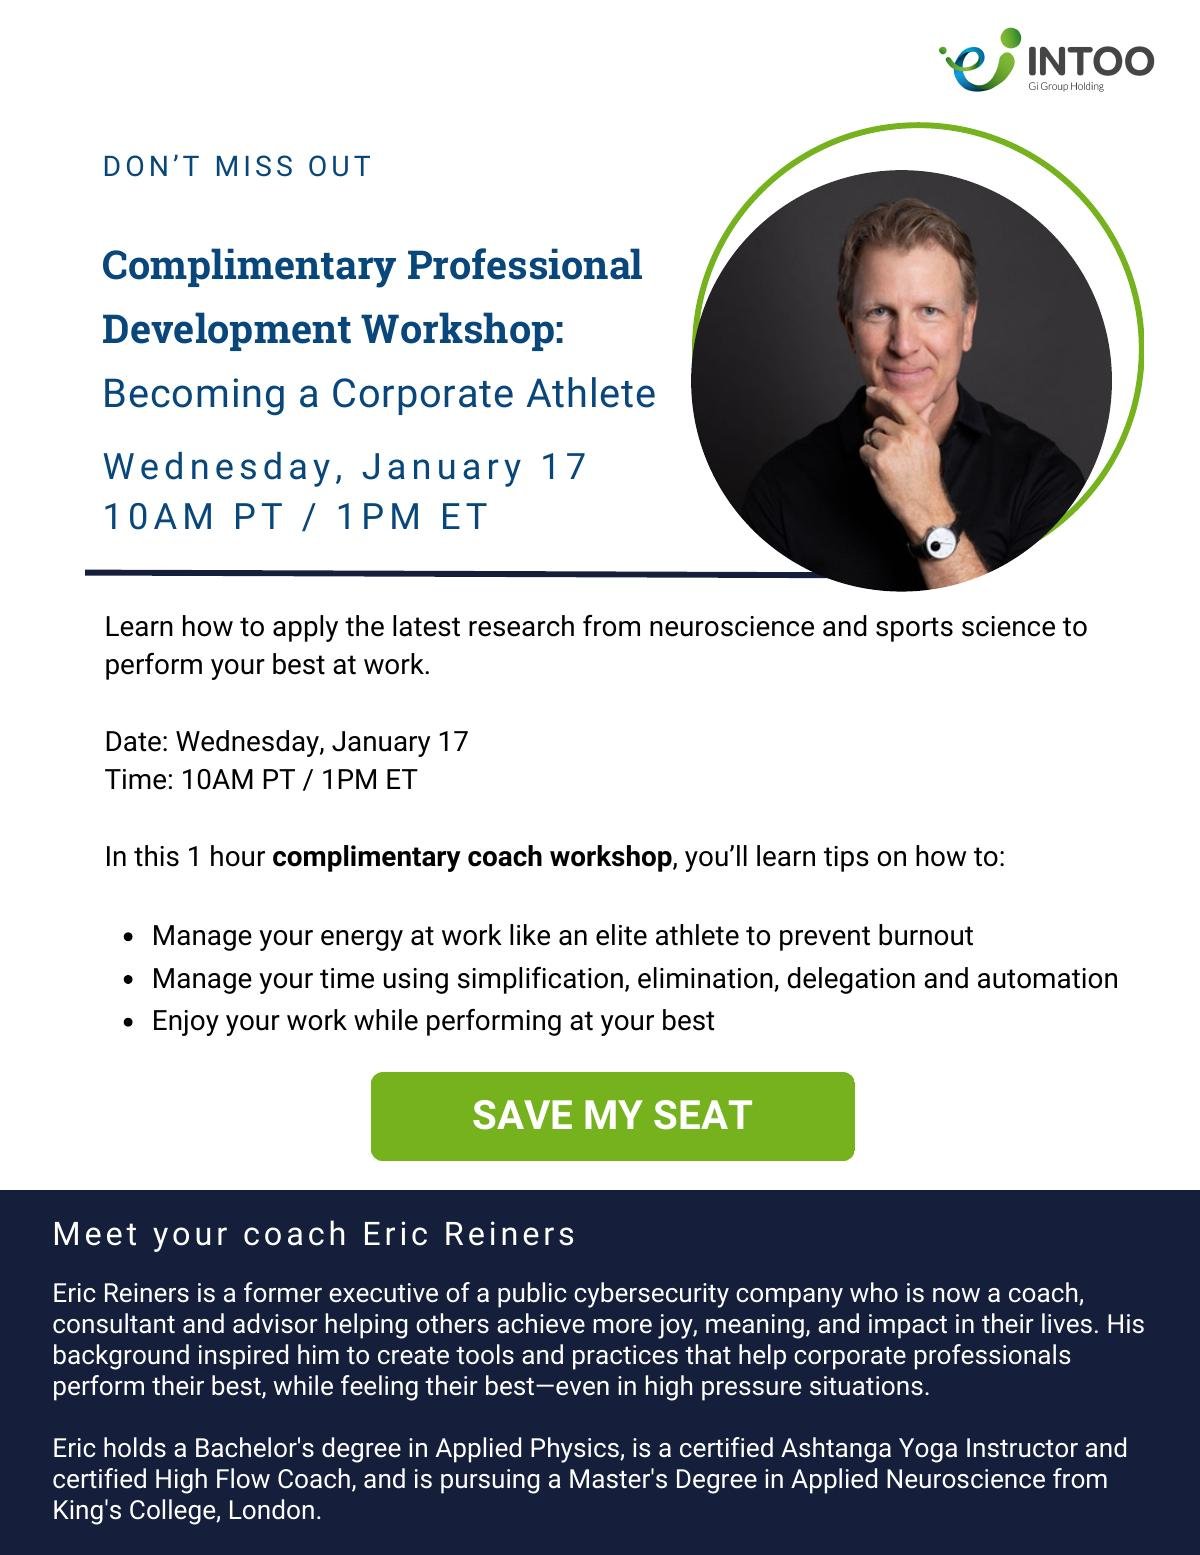 Complimentary Coaching Workshop for HR Leaders